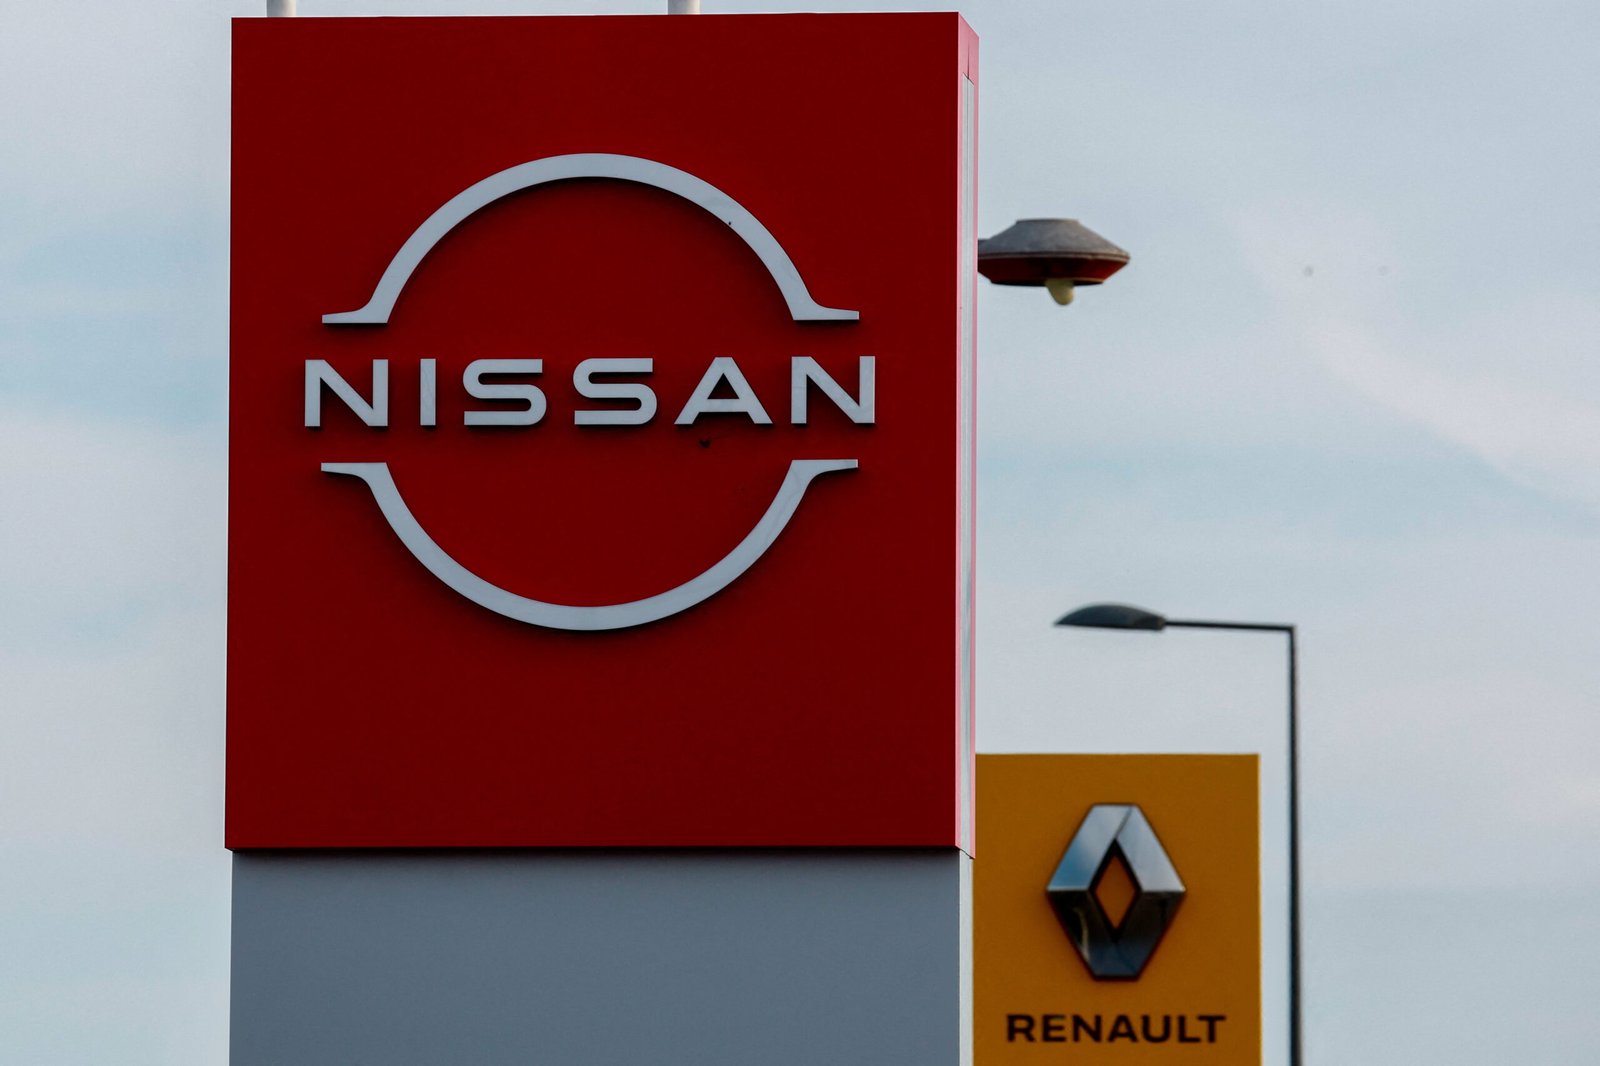 nissan,-renault-ready-to-announce-new-alliance-deal-in-days-–-sources